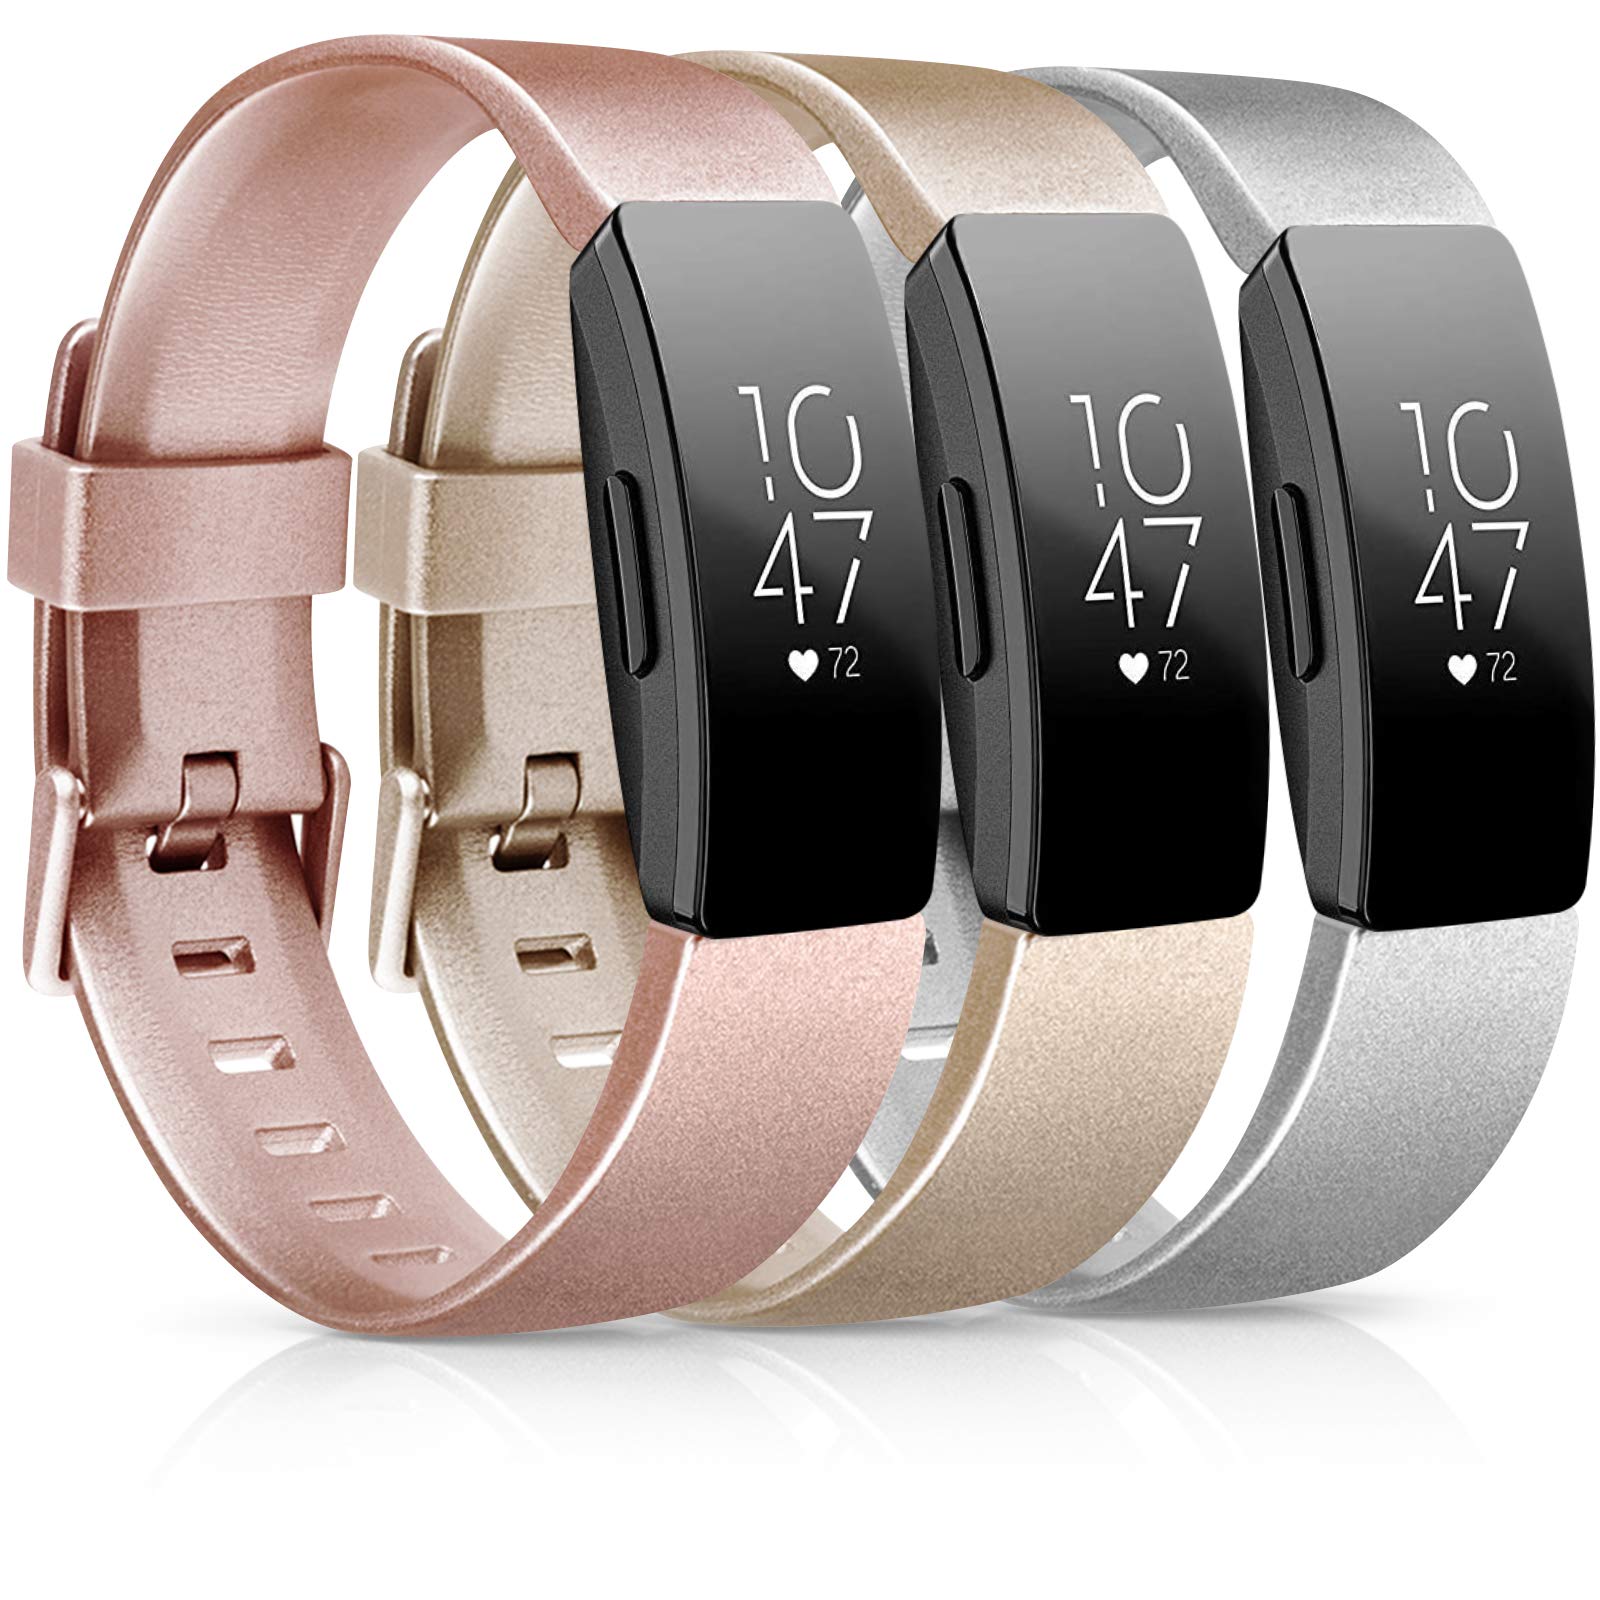 Book Cover [3 Pack] Soft TPU Bands Compatible with Fitbit Inspire 2 / Fitbit Inspire HR/Fitbit Inspire/Fitbit Ace 2 Wristbands Sports Waterproof Straps for Fitbit Inspire HR (01 Rose Gold/Gold/Silver, Small) Small 01 Rose gold/Gold/Silver